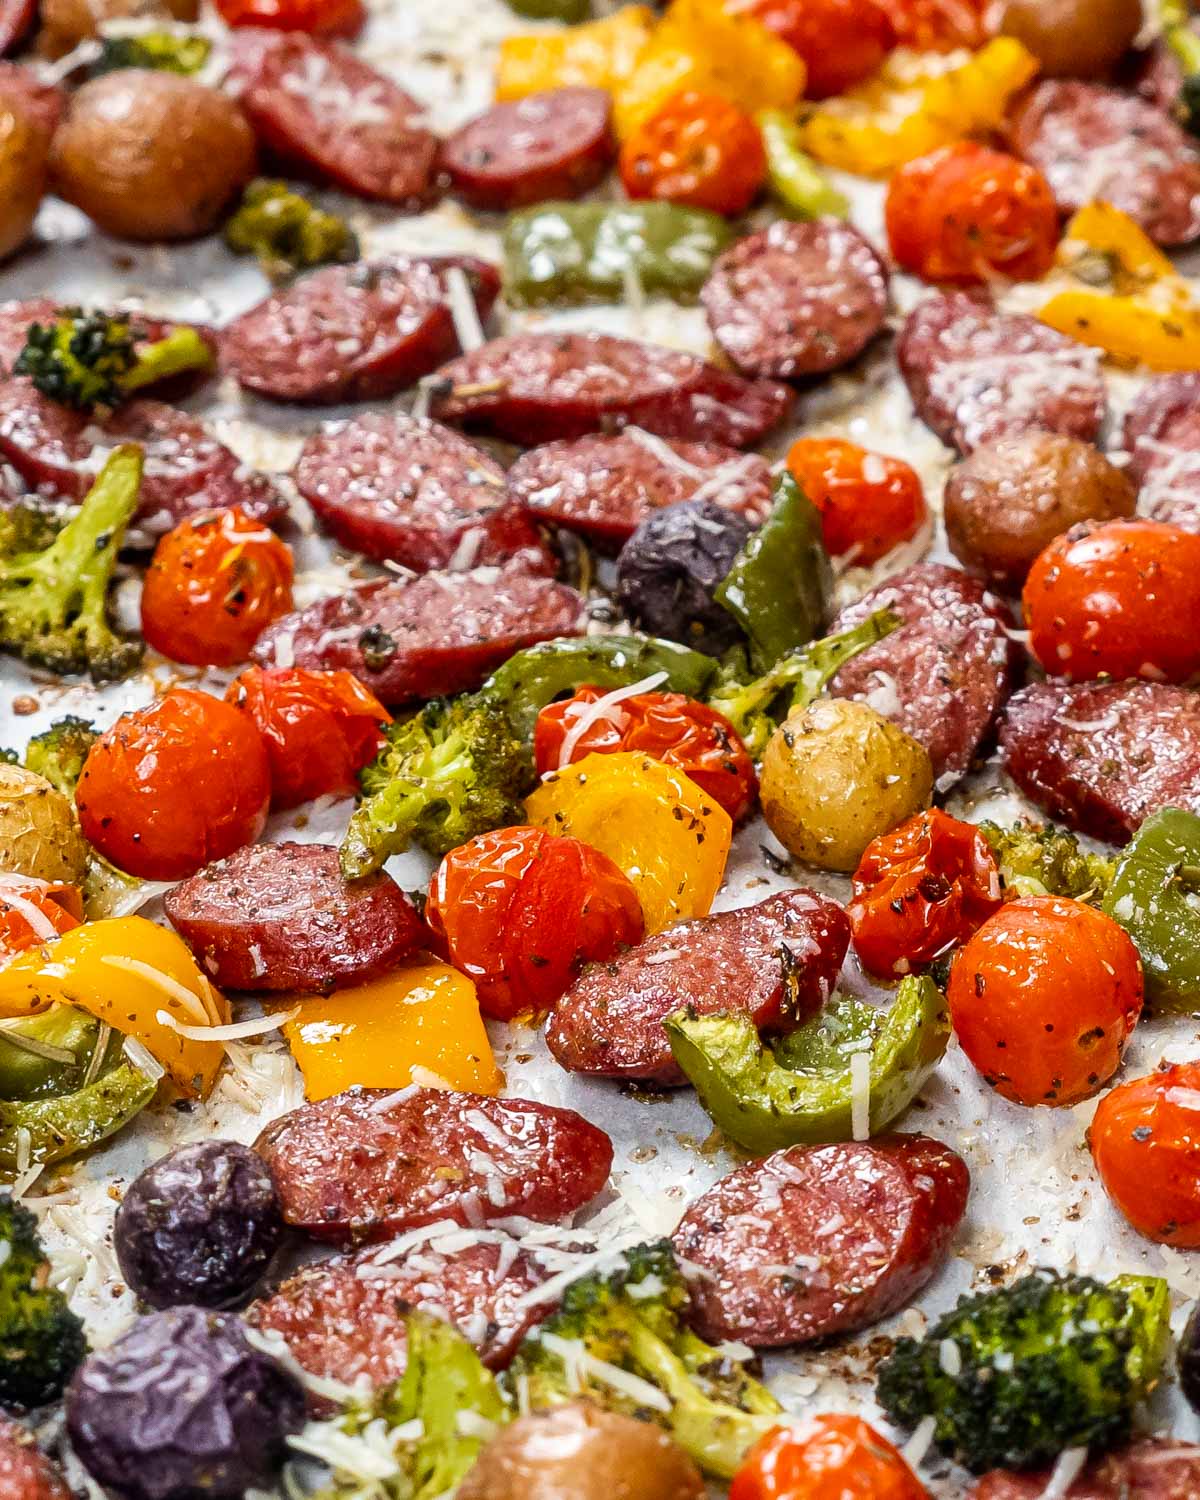 Air Fryer Smoked Sausage with Vegetables